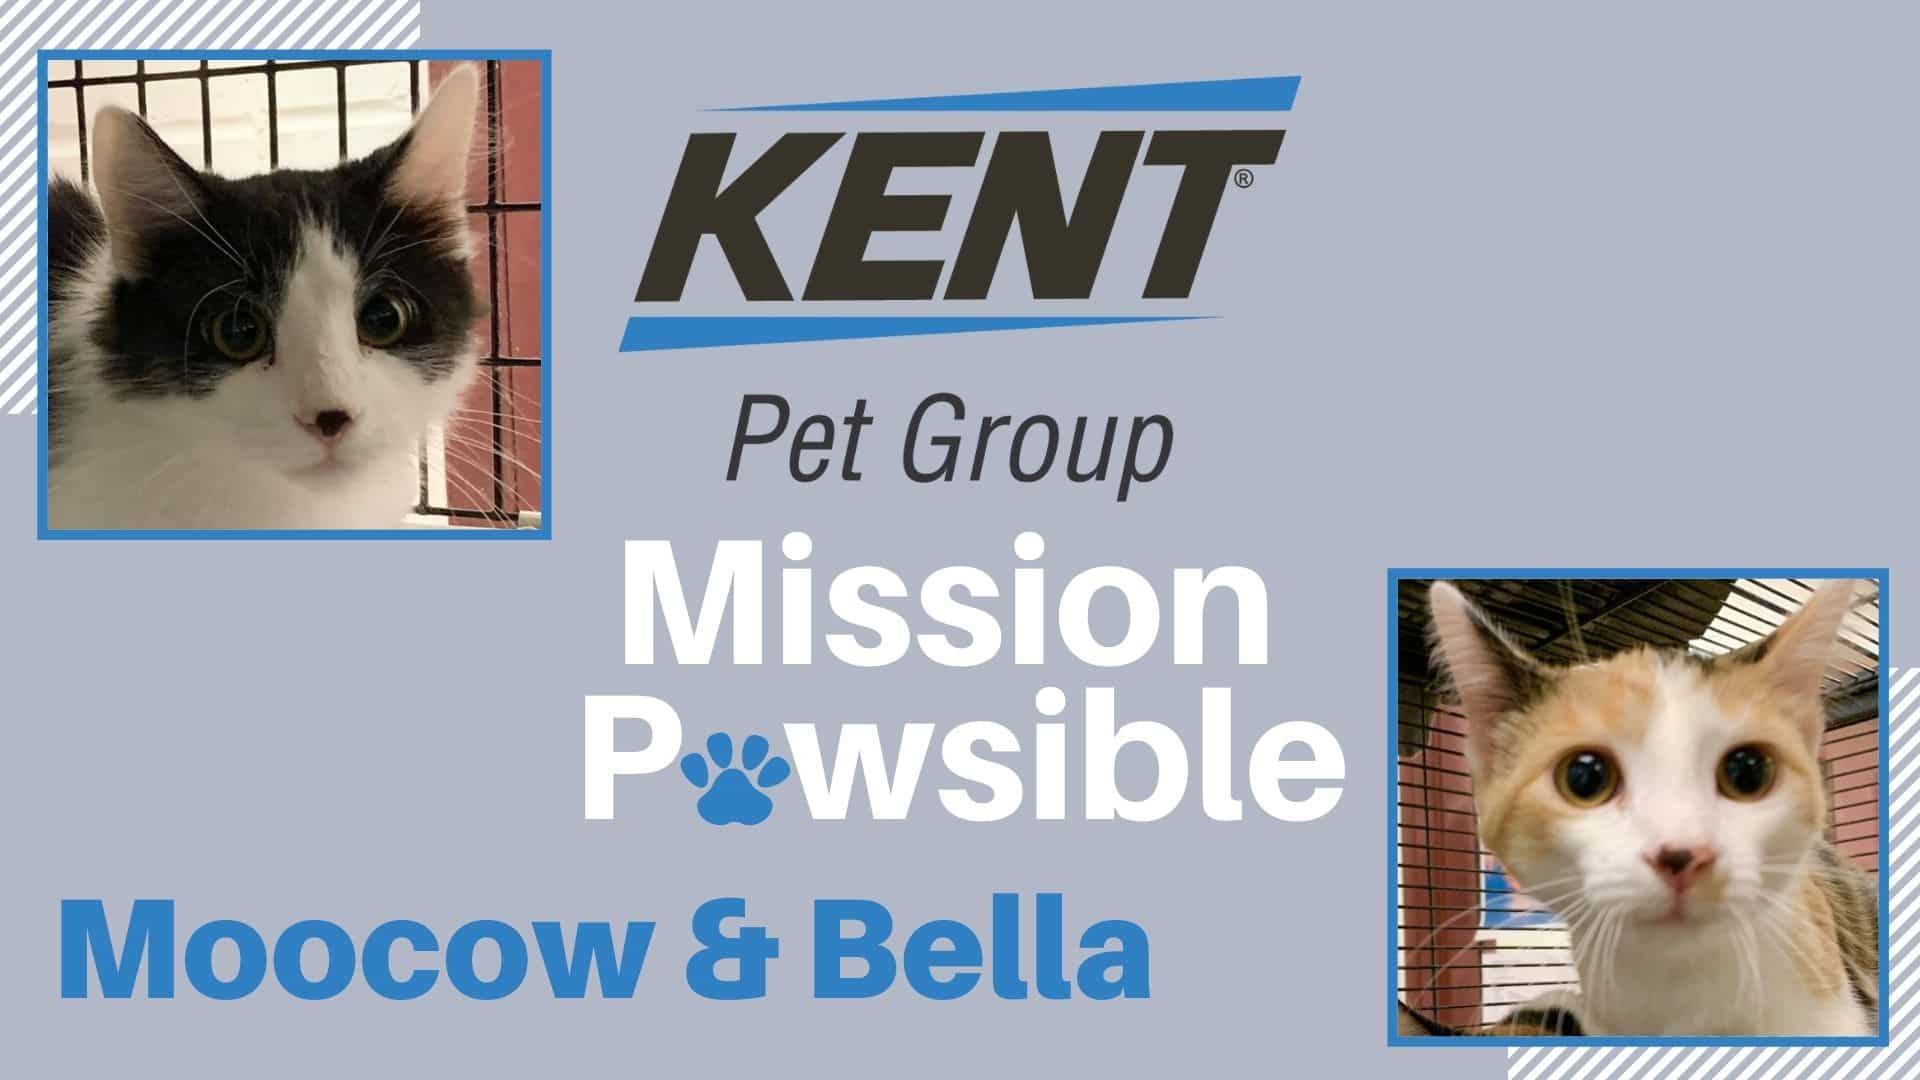 Mission Pawsible Sept. 29